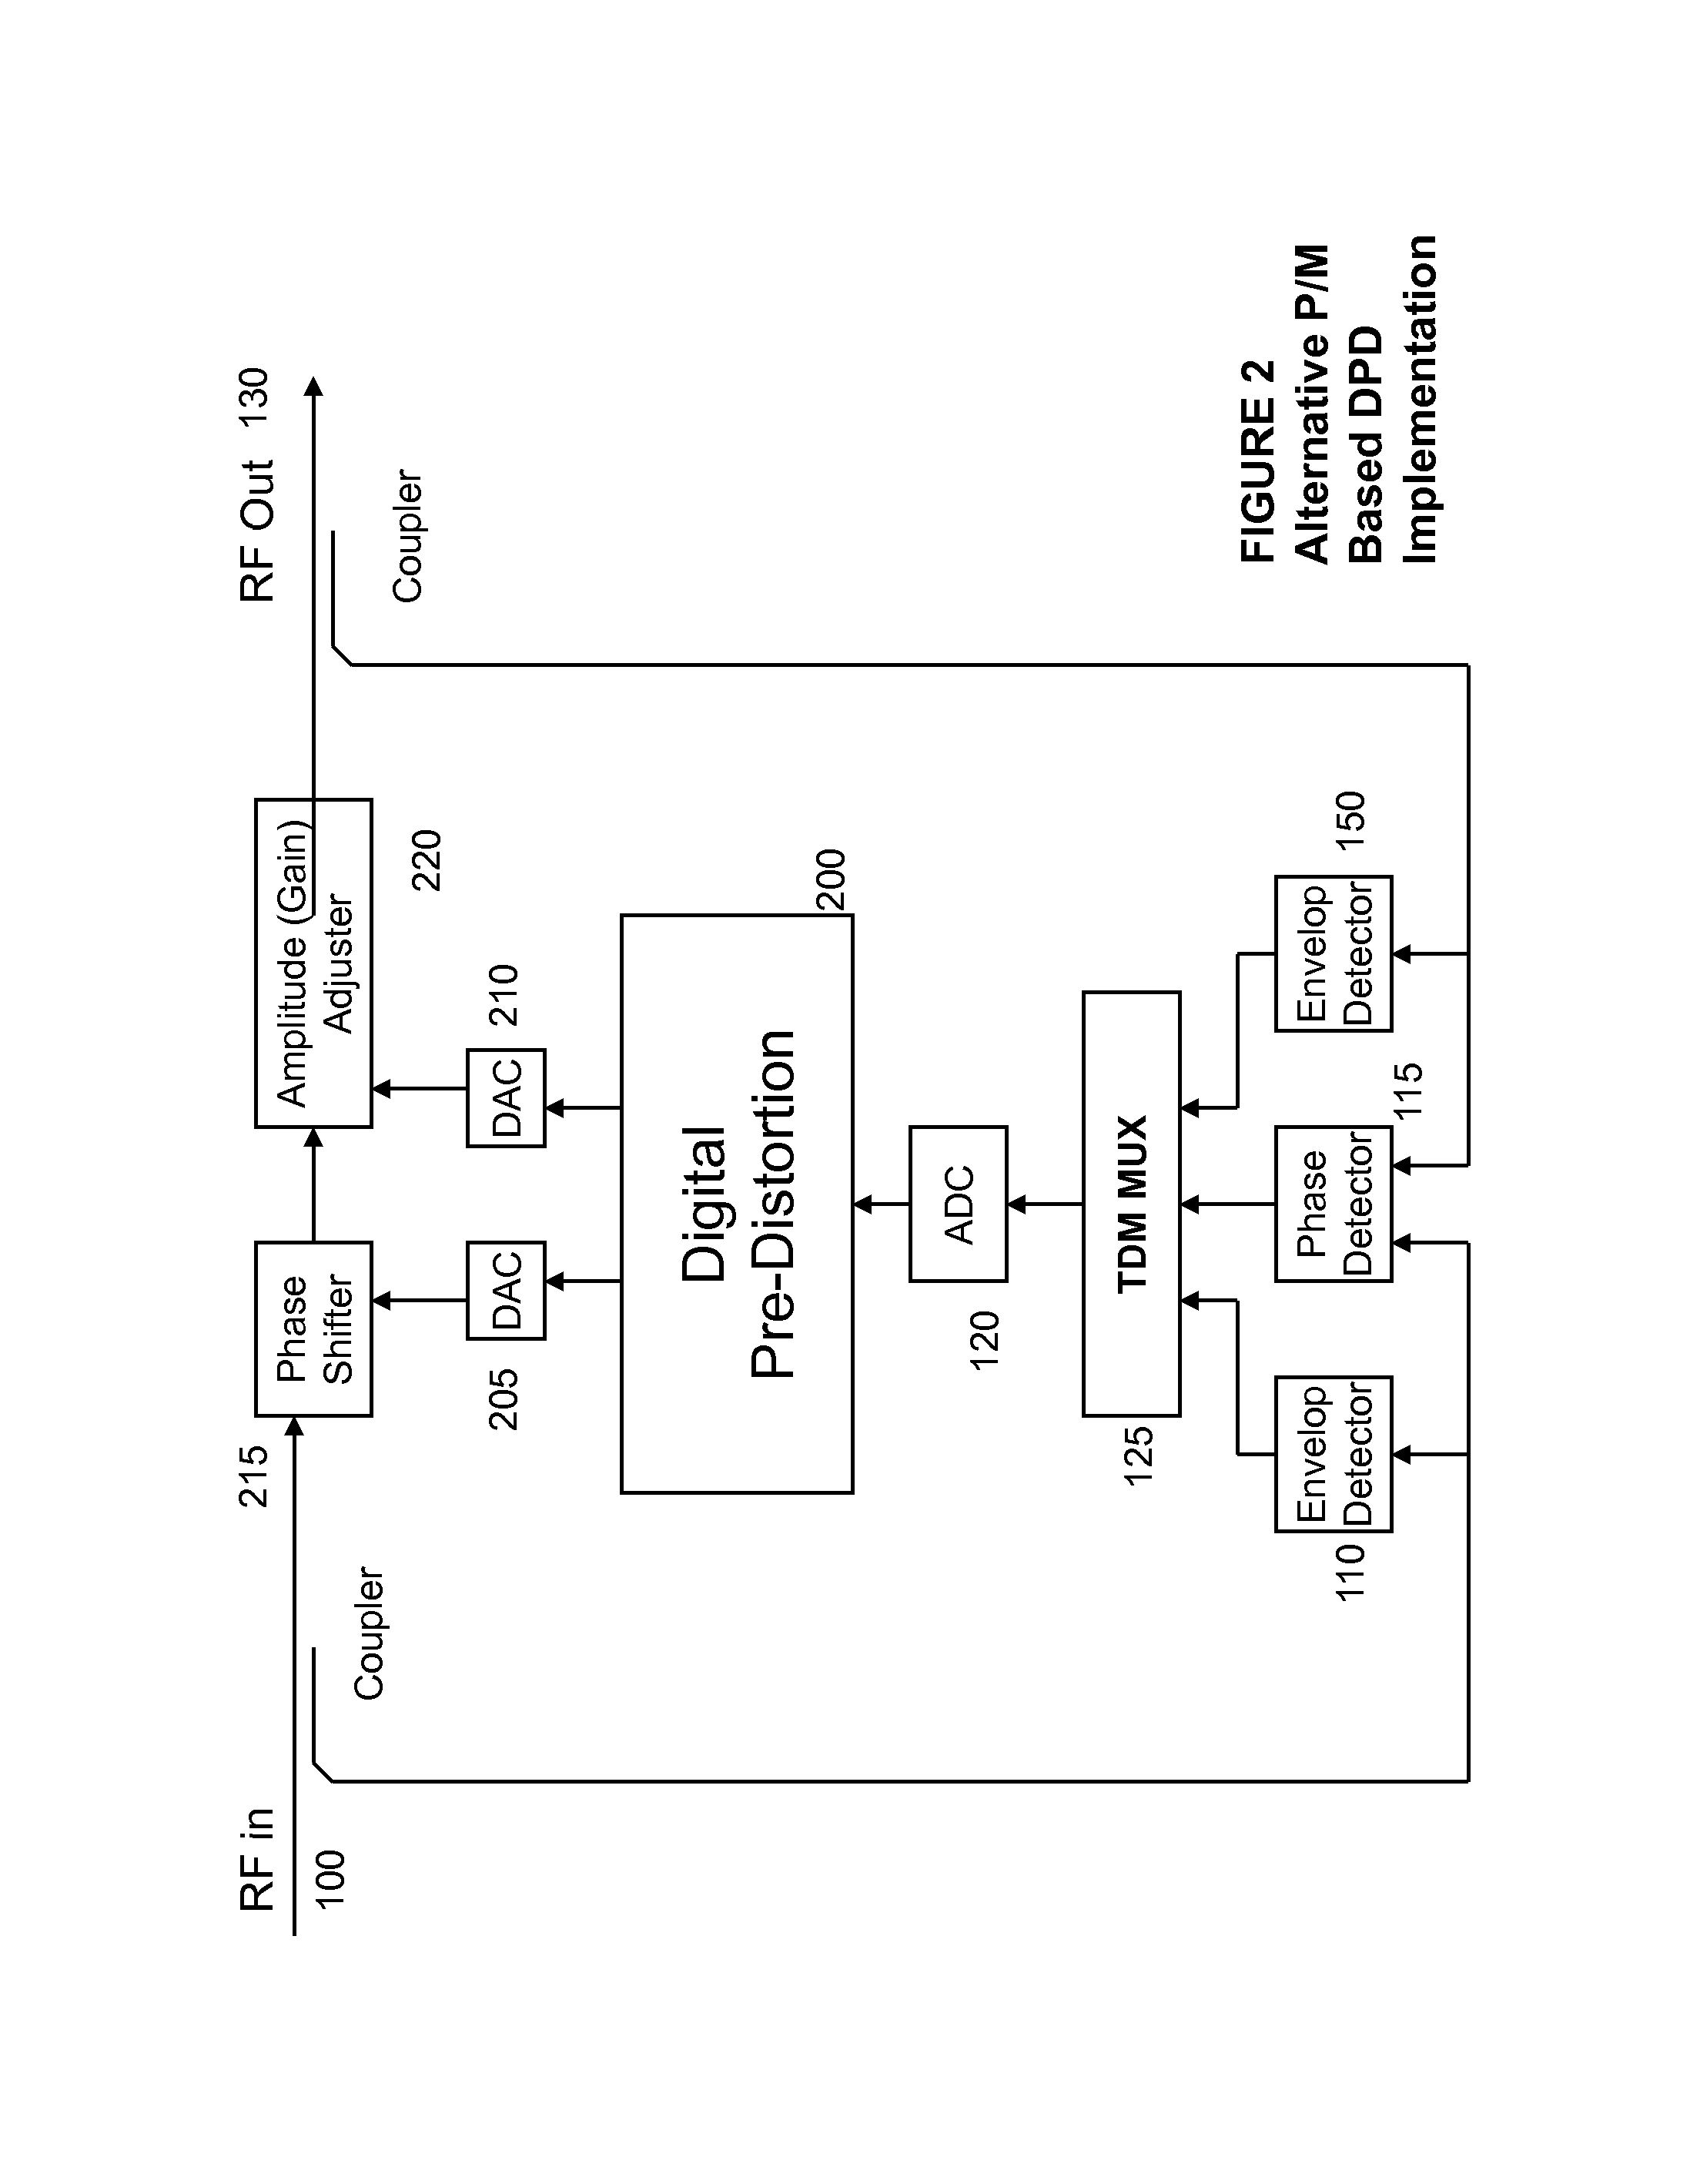 Power amplifier predistortion methods and apparatus using envelope and phase detector